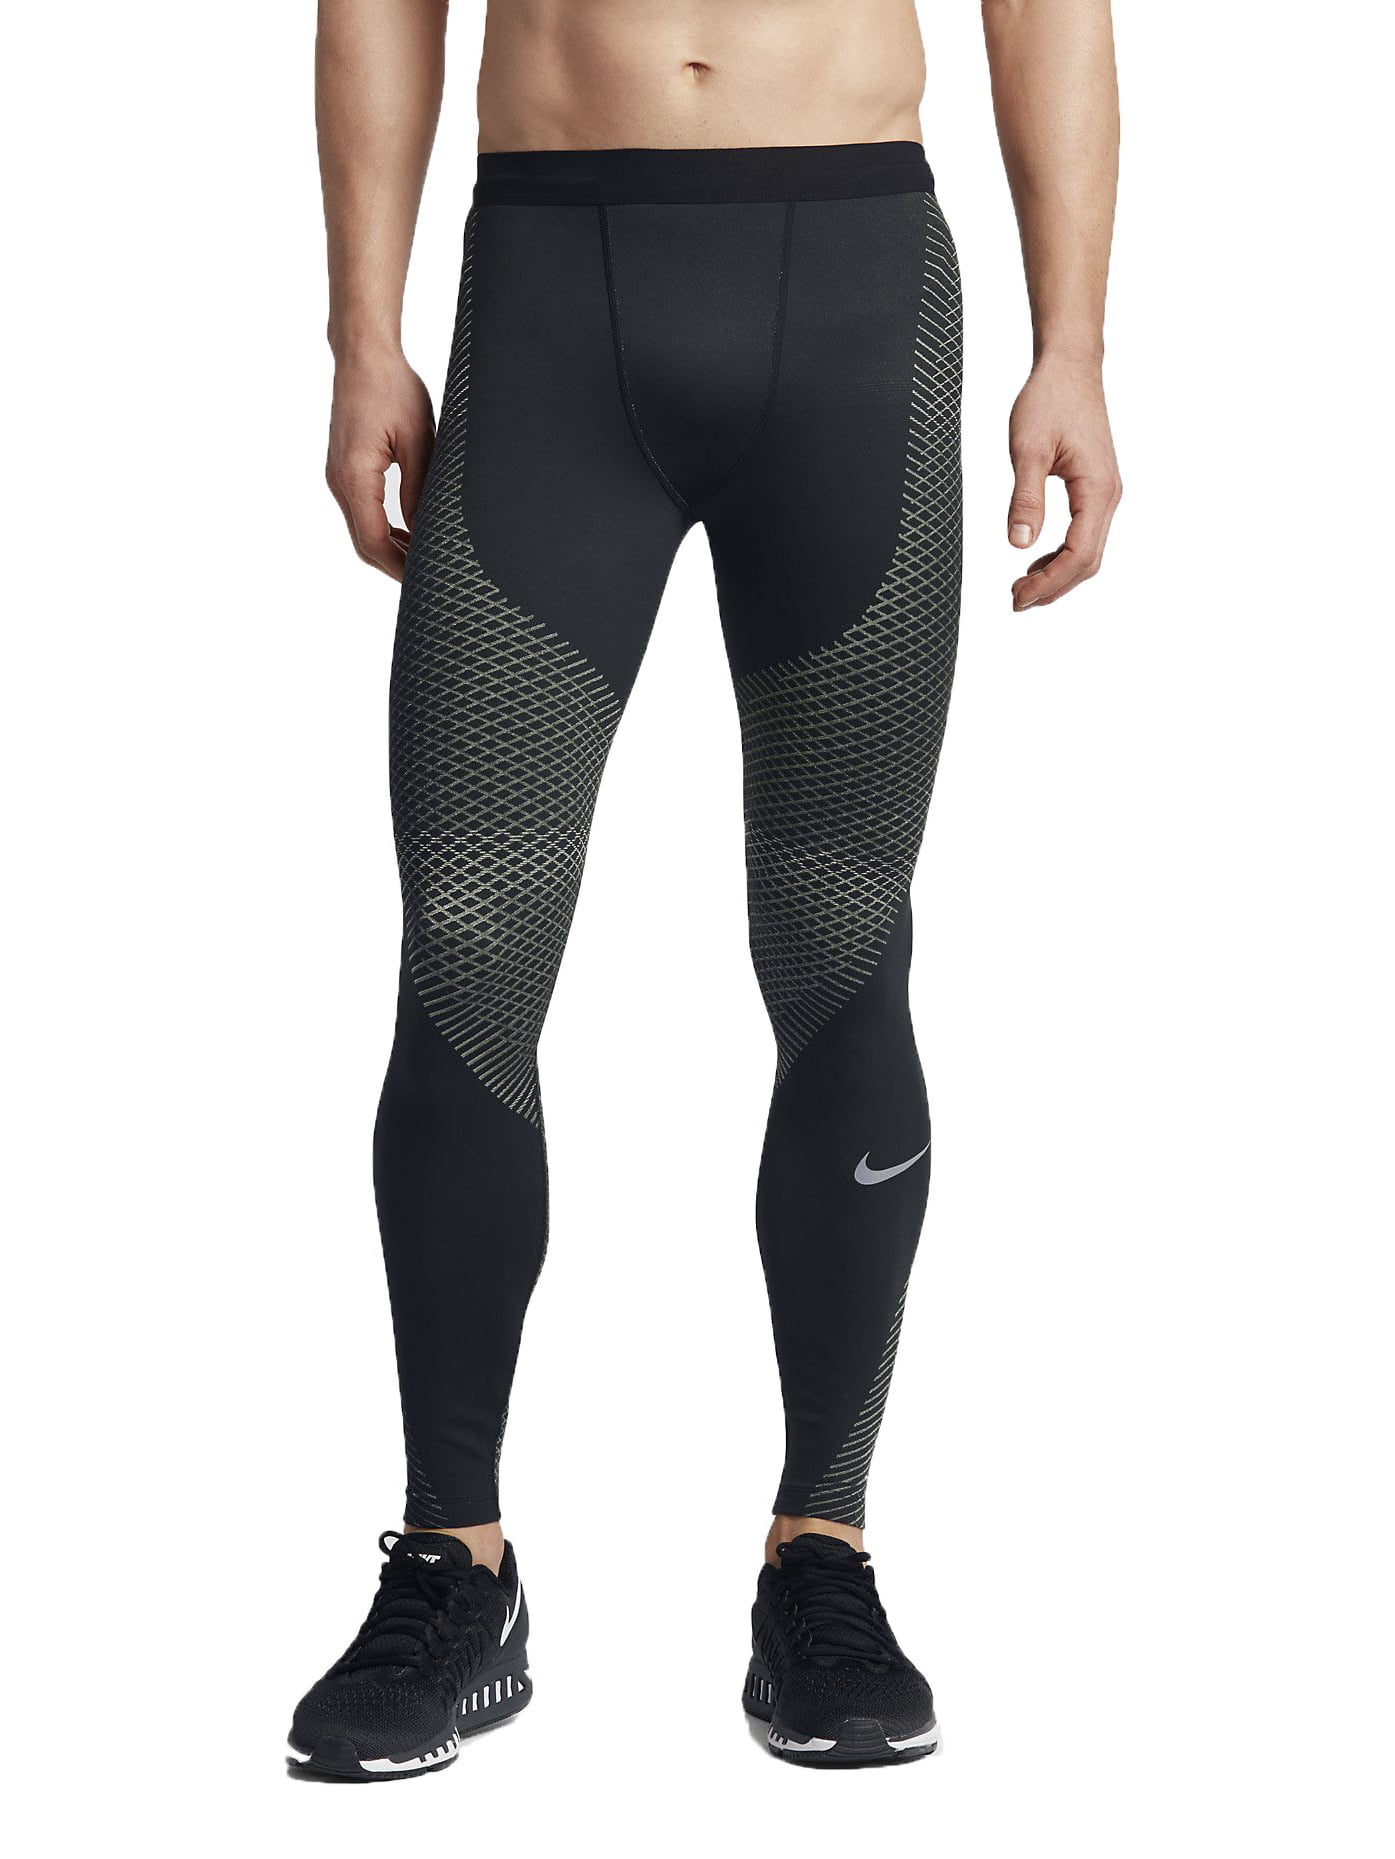 Nike Men's Zonal Strength Performance Compression Running Tights, Black ...